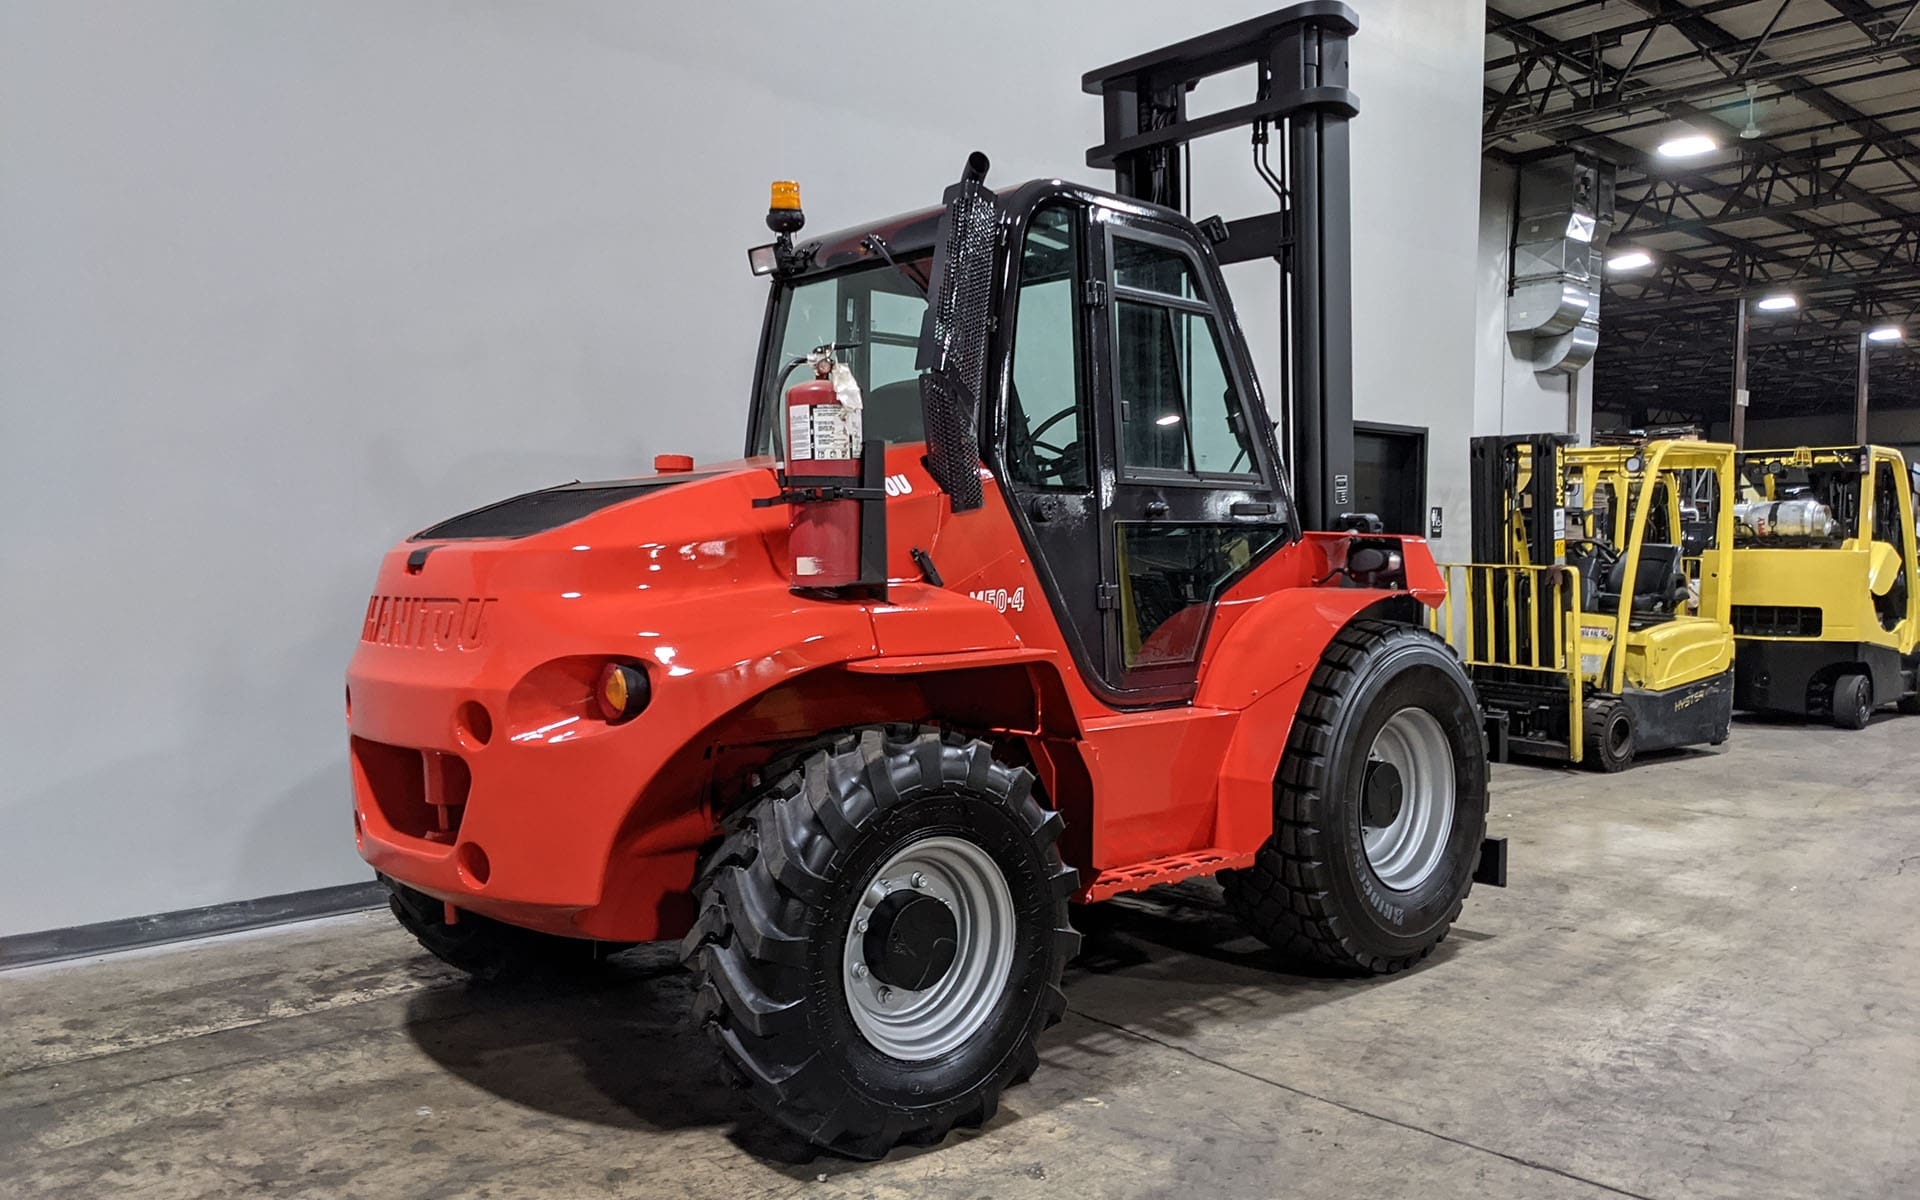 Used 2014 MANITOU M50-4  | Cary, IL